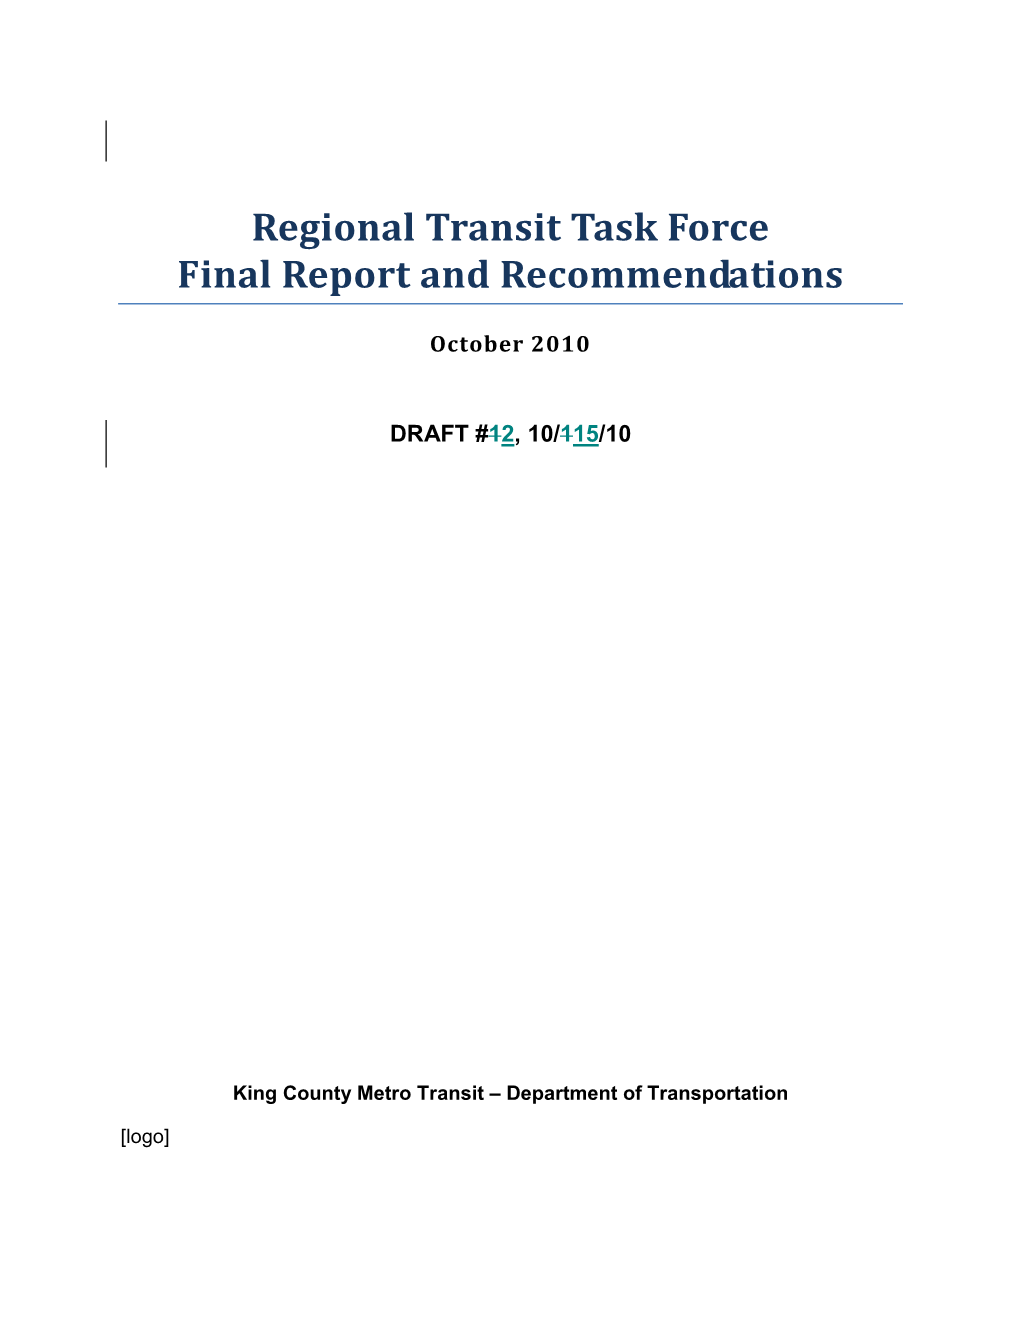 Regional Transit Task Force Final Report and Recommendations